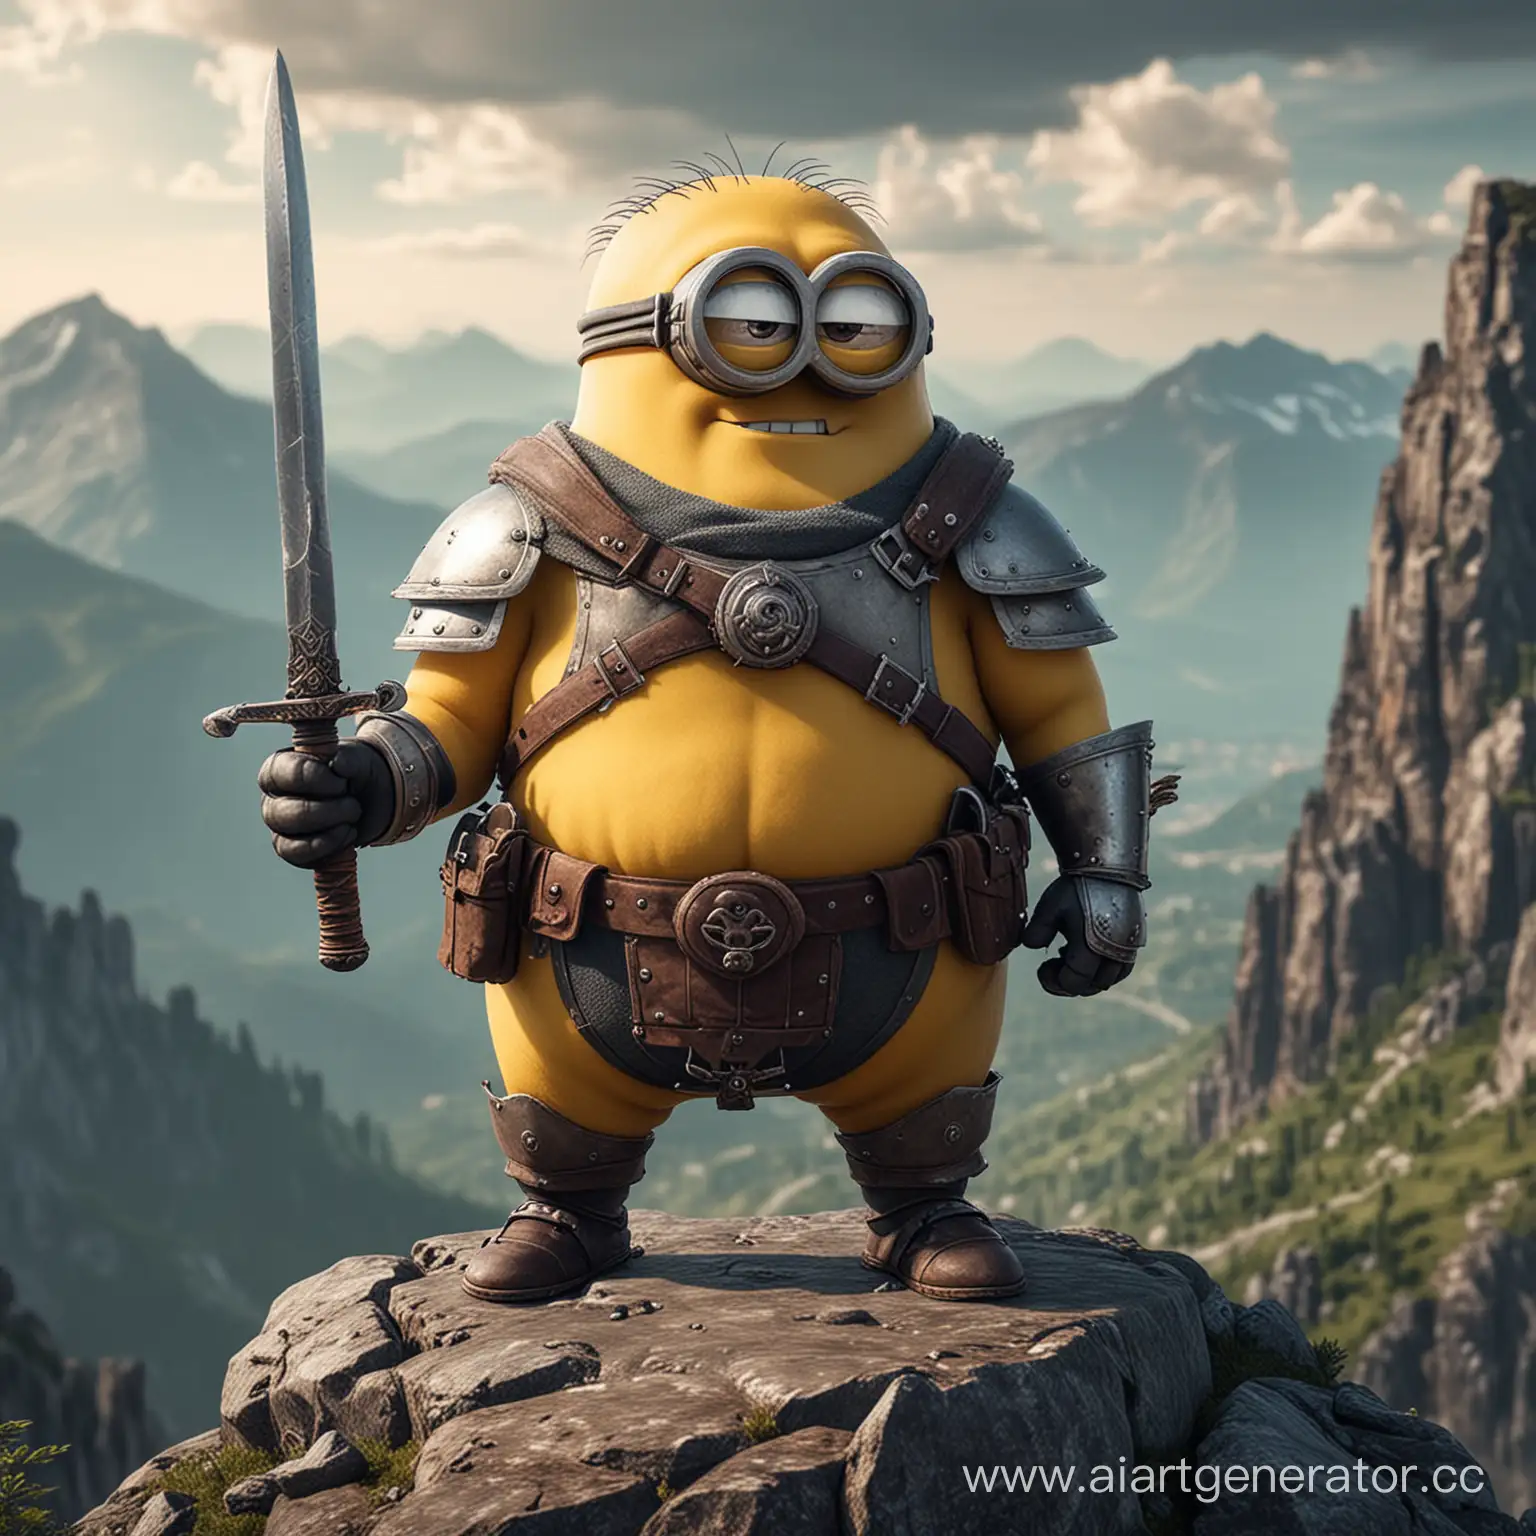 Chubby-Minion-Knight-with-Sword-atop-Mountain